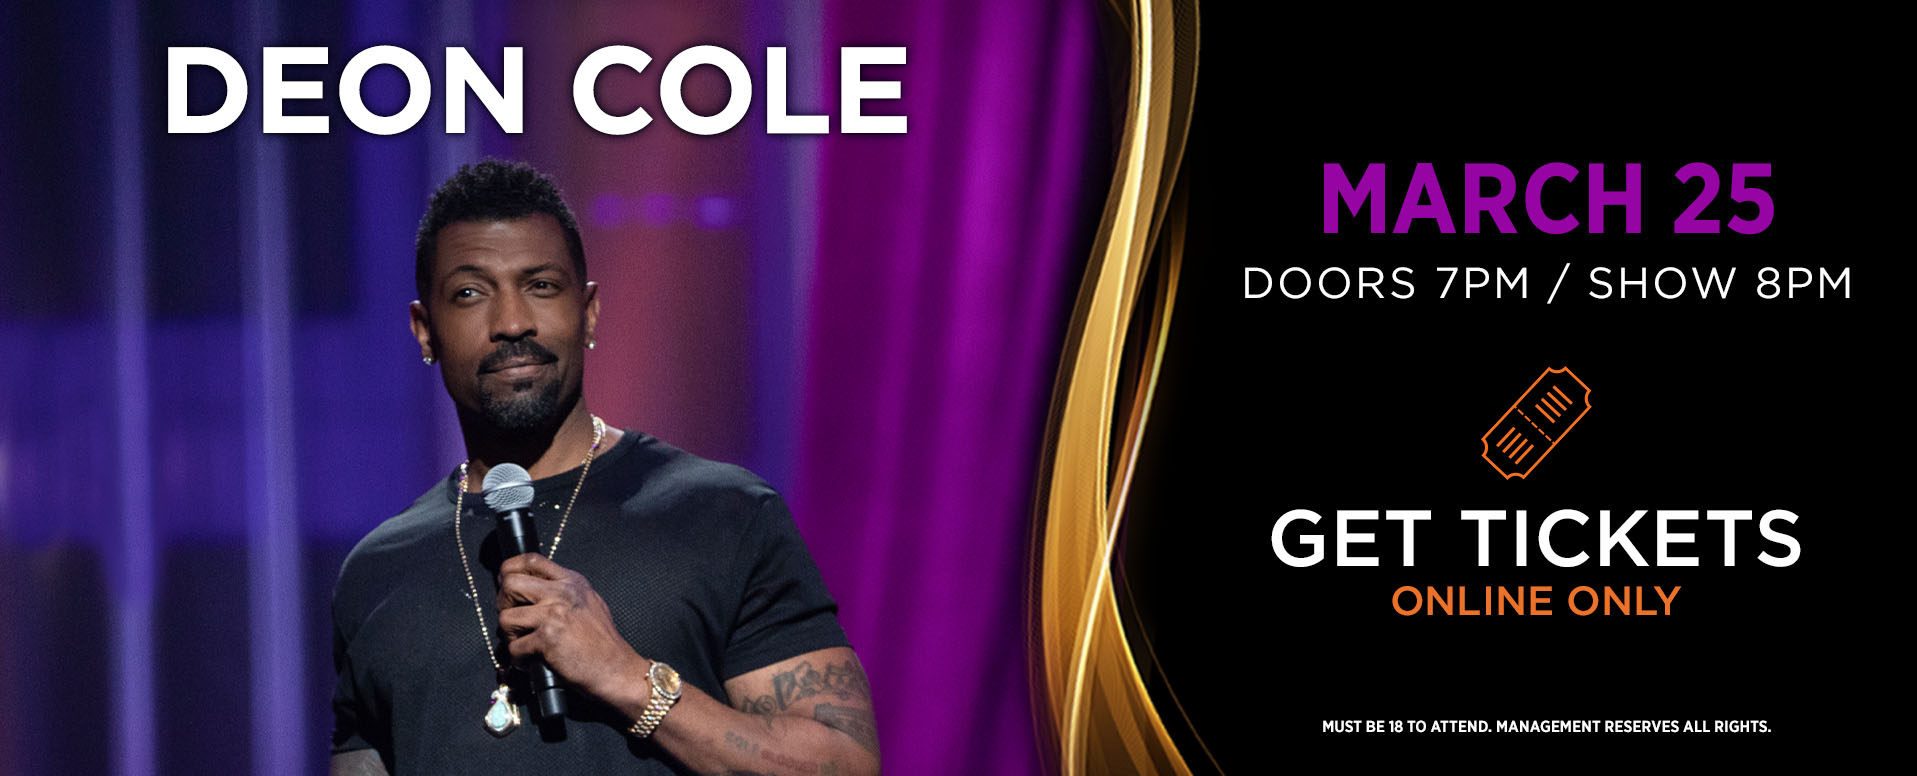 Deon Cole - March 25th